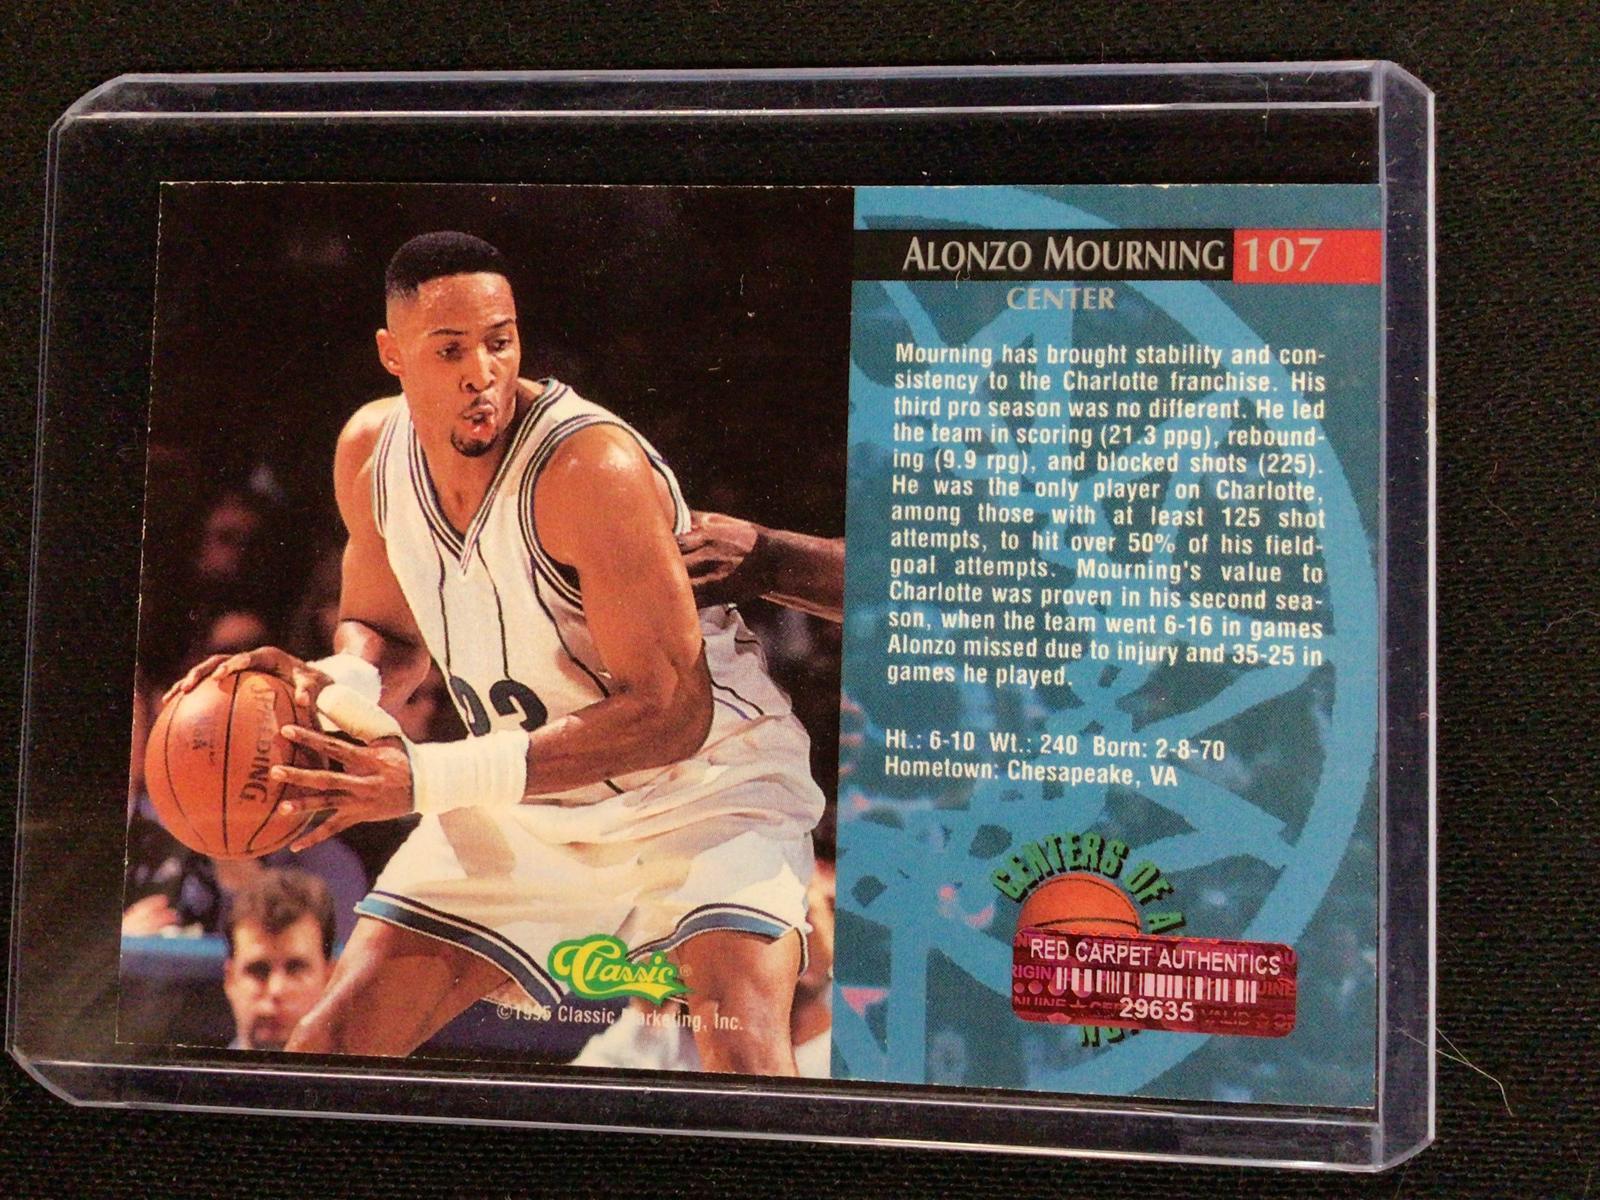 1995 CLASSIC ALONZO MOURNING AUTOGRAPH SIGNED CARD W/ RED CARPET AUTHENTICS COA